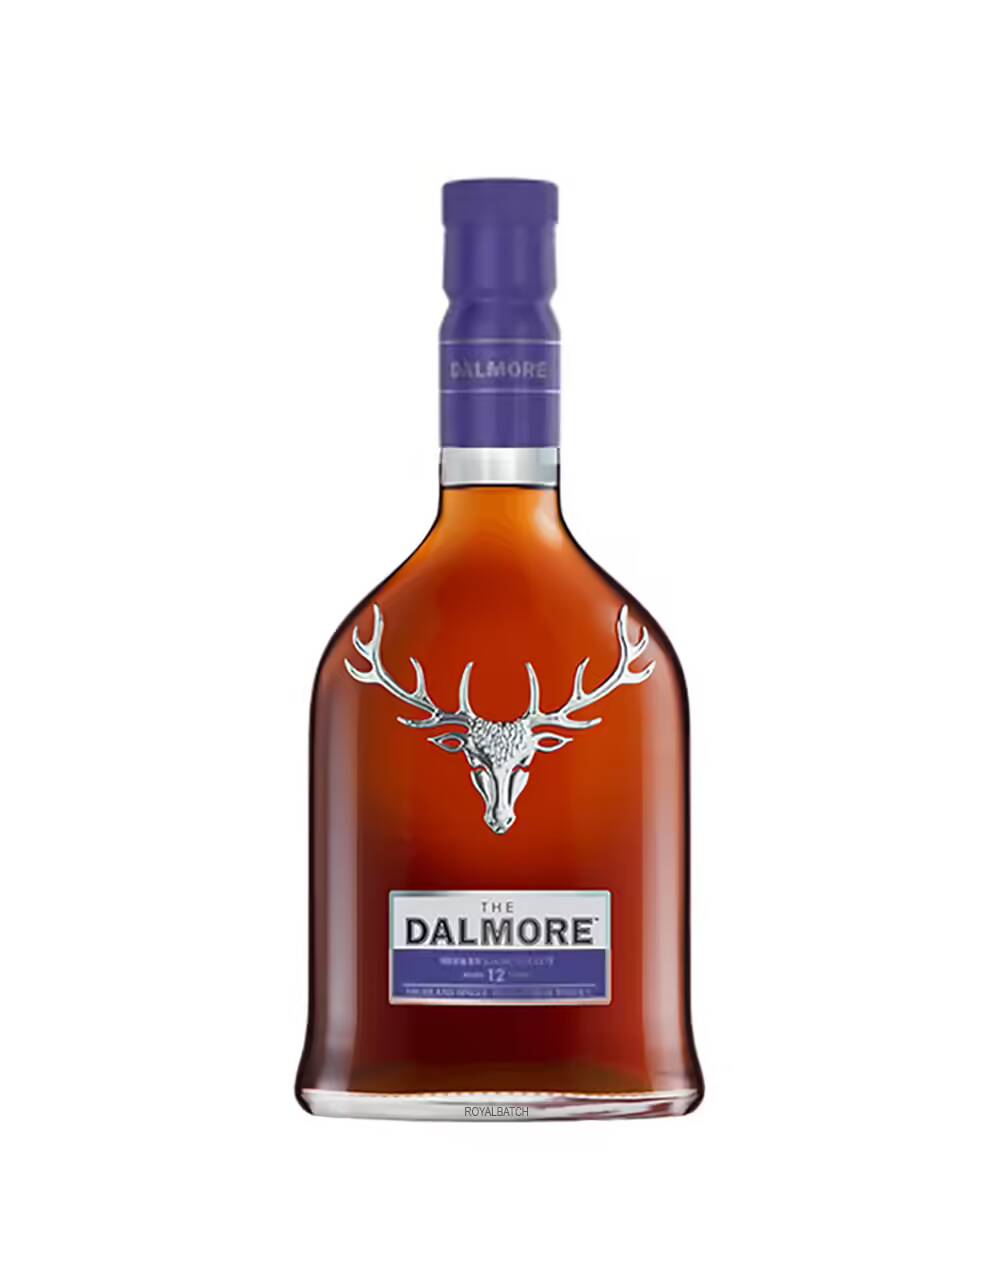 The Dalmore Sherry Cask Select 12 Year Old Scotch Whisky